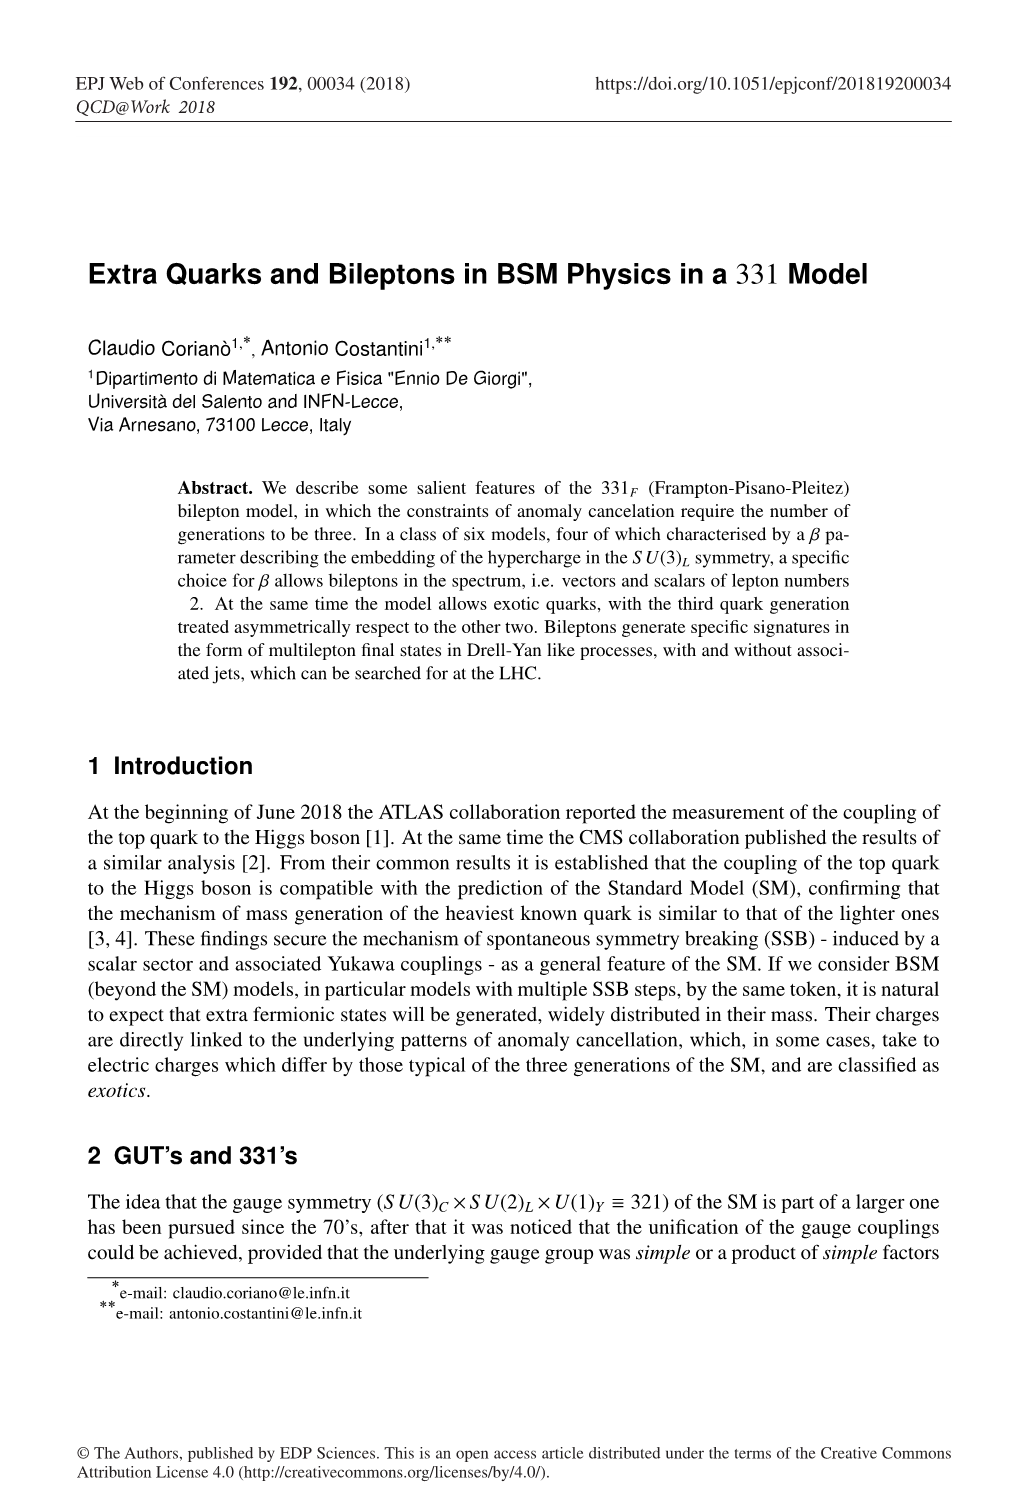 Extra Quarks and Bileptons in BSM Physics in a 331 Model